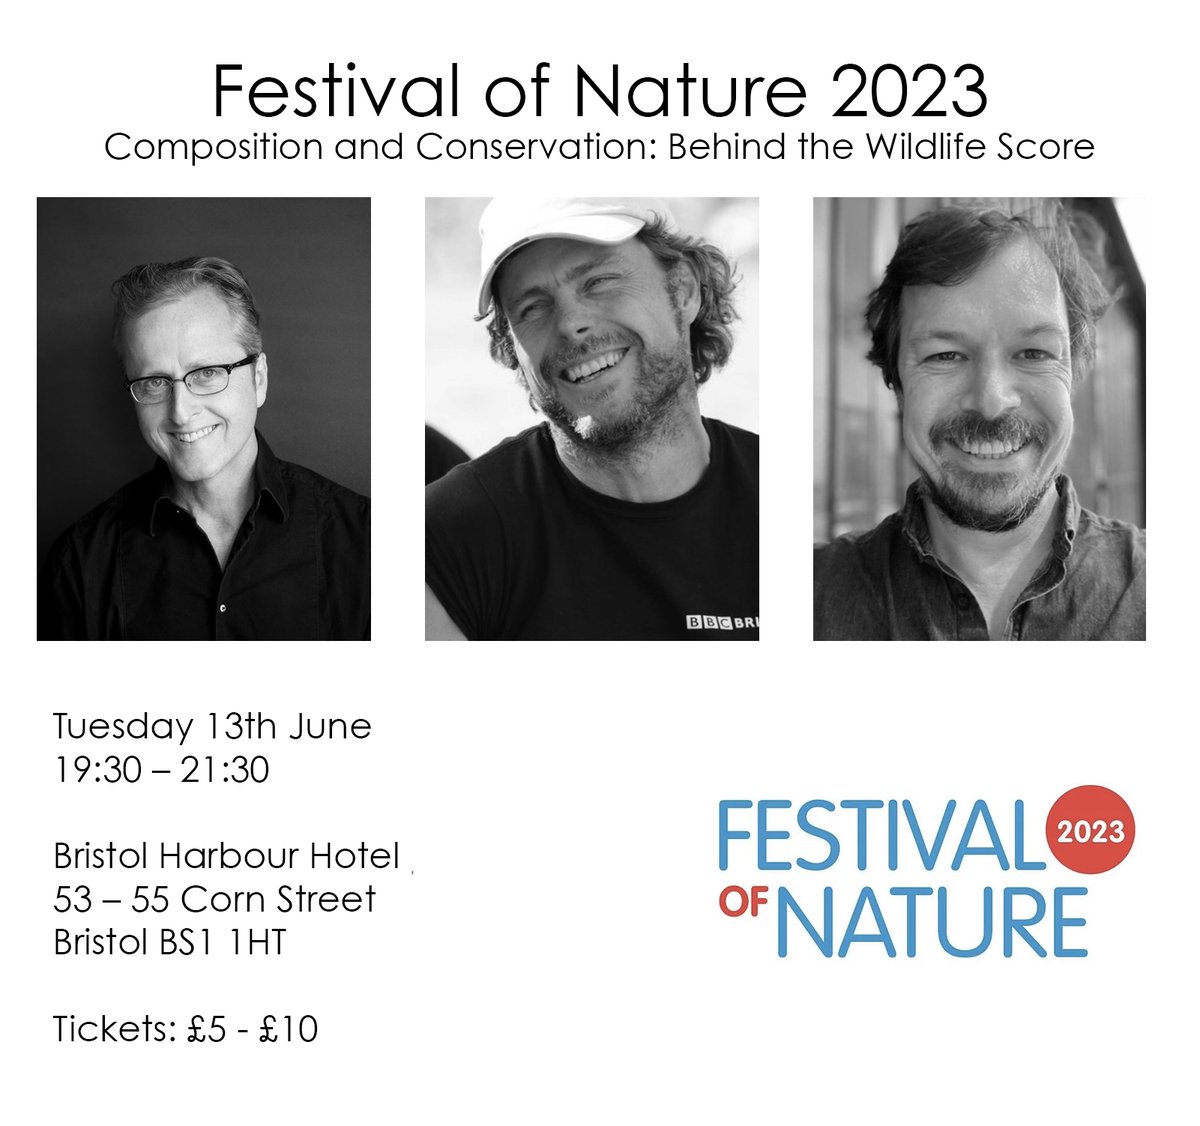 Interested in composition, natural history, conservation, music & wildlife score? Dr Simon Bell in conversation with composer William Goodchild & director James Reed. williamgoodchild.com/post/festival-… @FestofNature @WGoodchildMusic #Bristol #event #Wildlife #Composition #ChimpEmpire